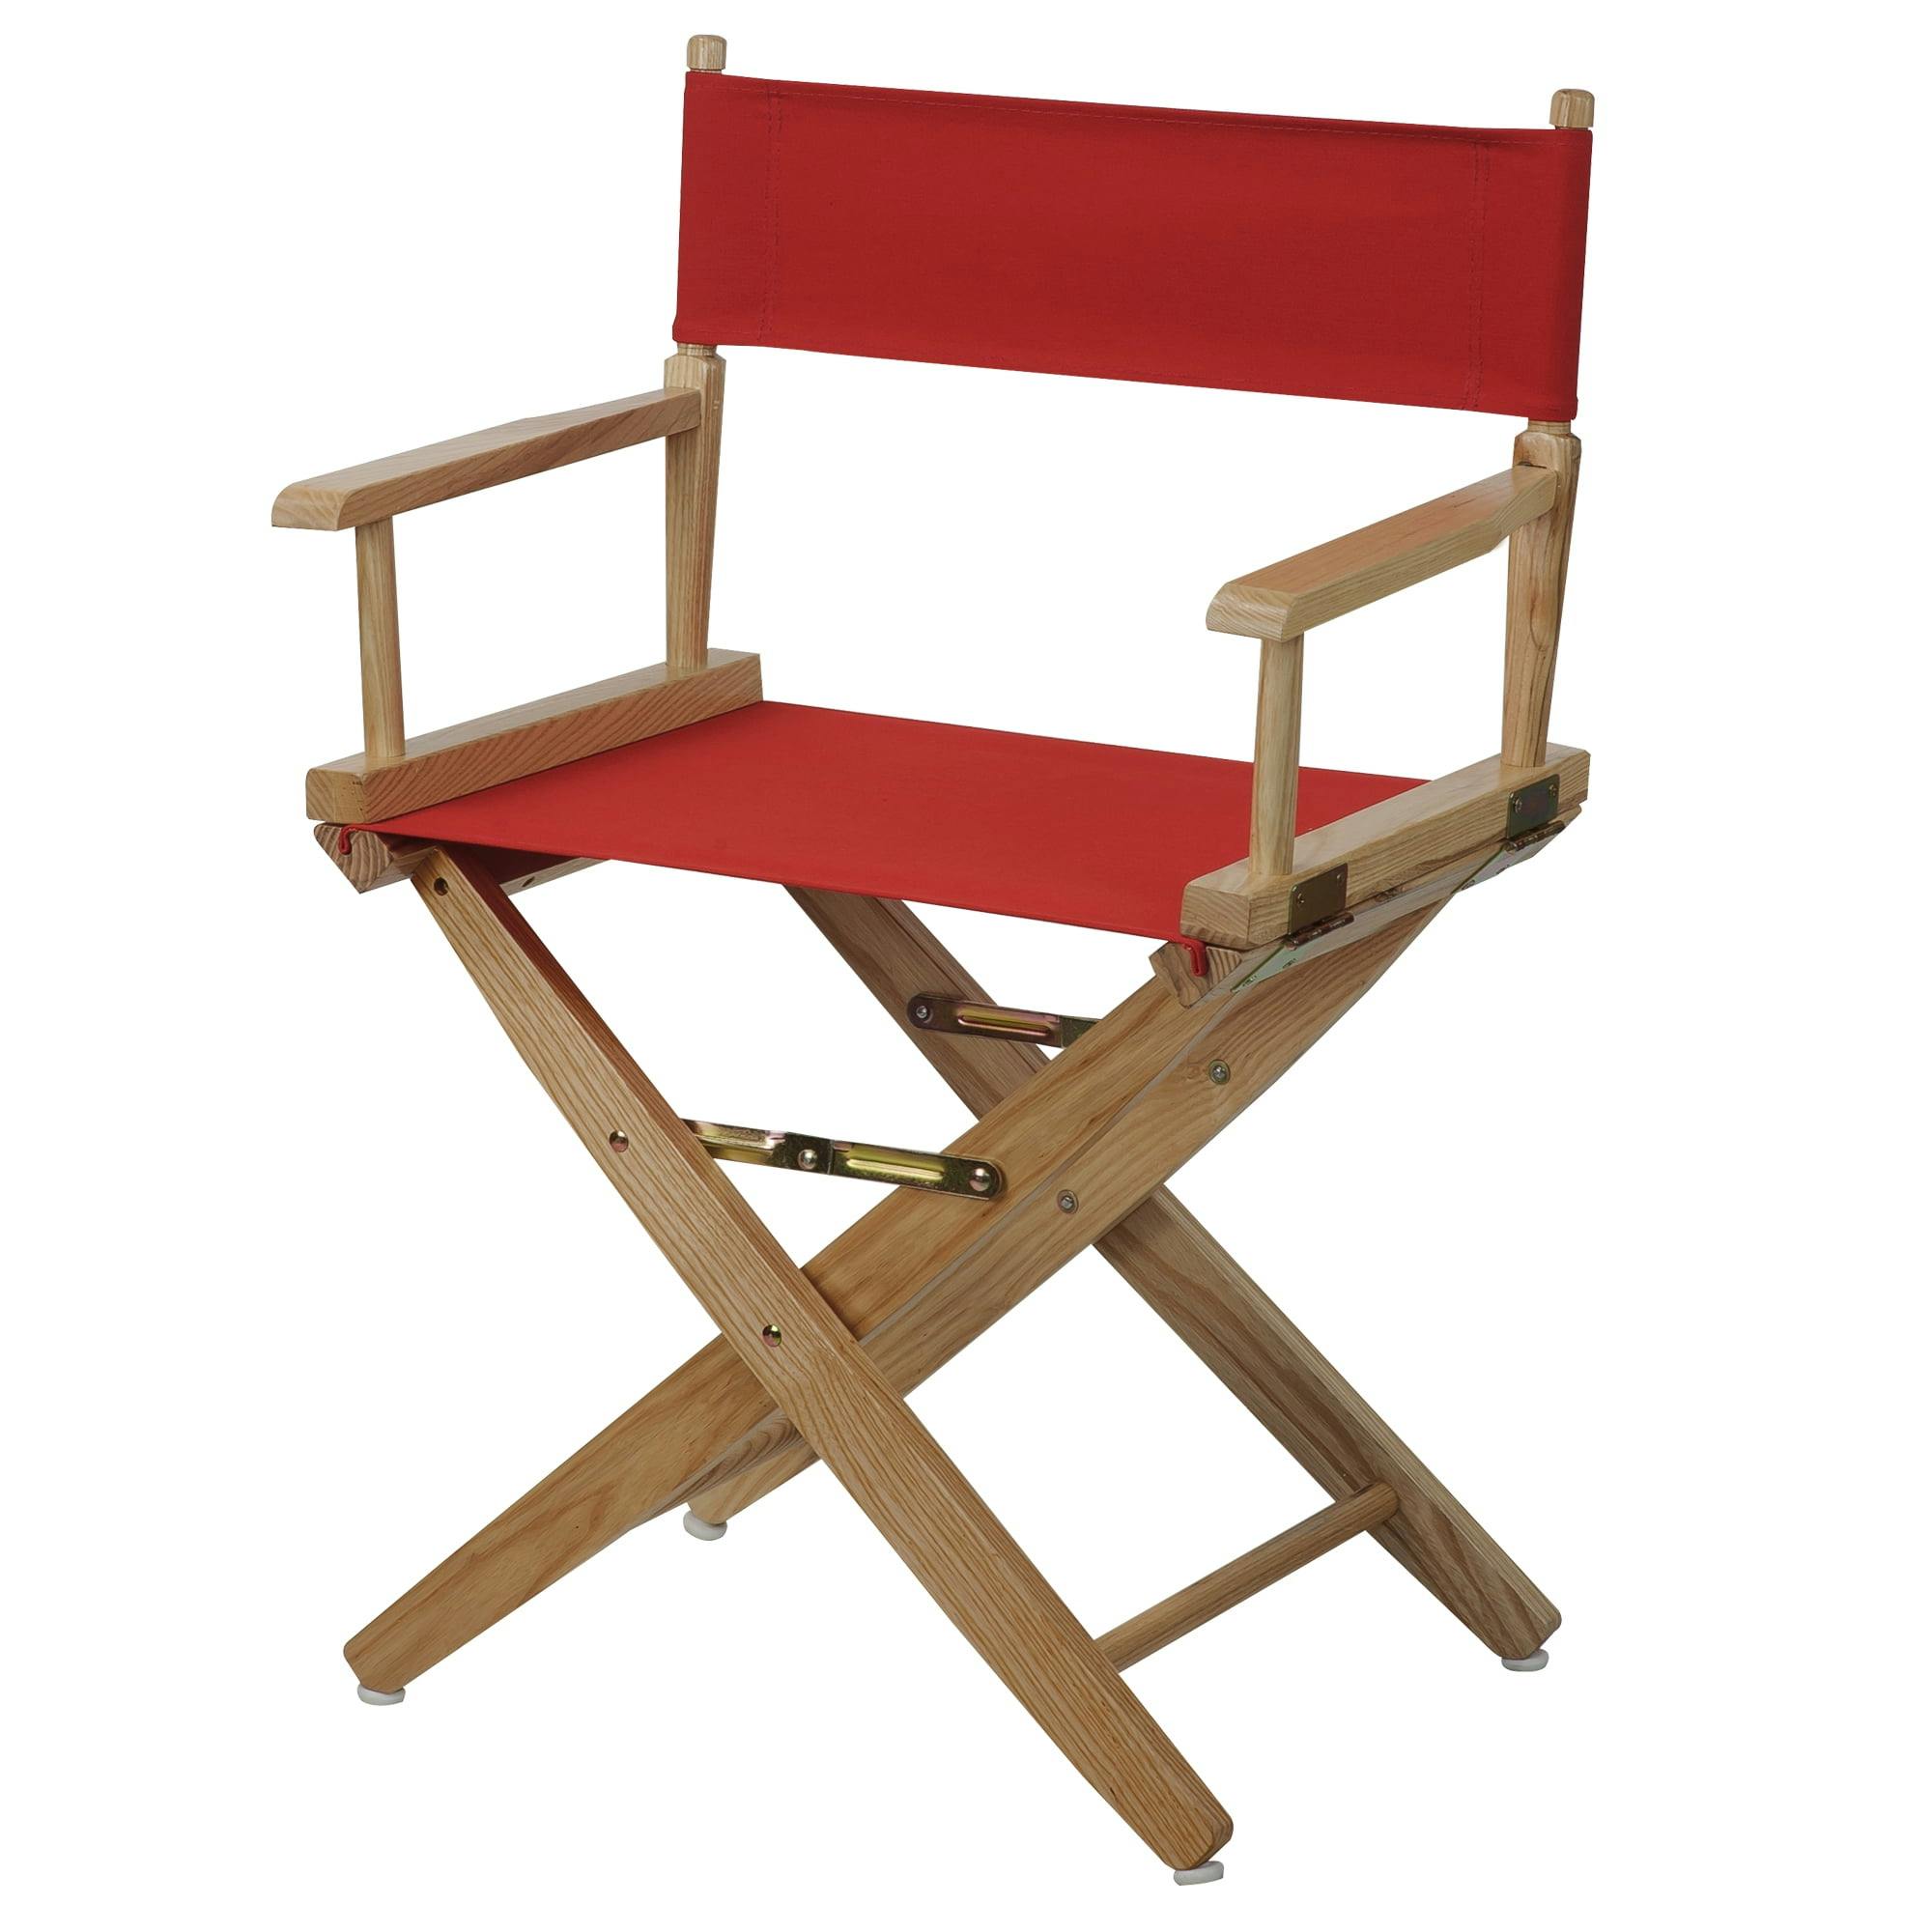 Foldable Classic Director's Chair in Natural Wood with Red Accents